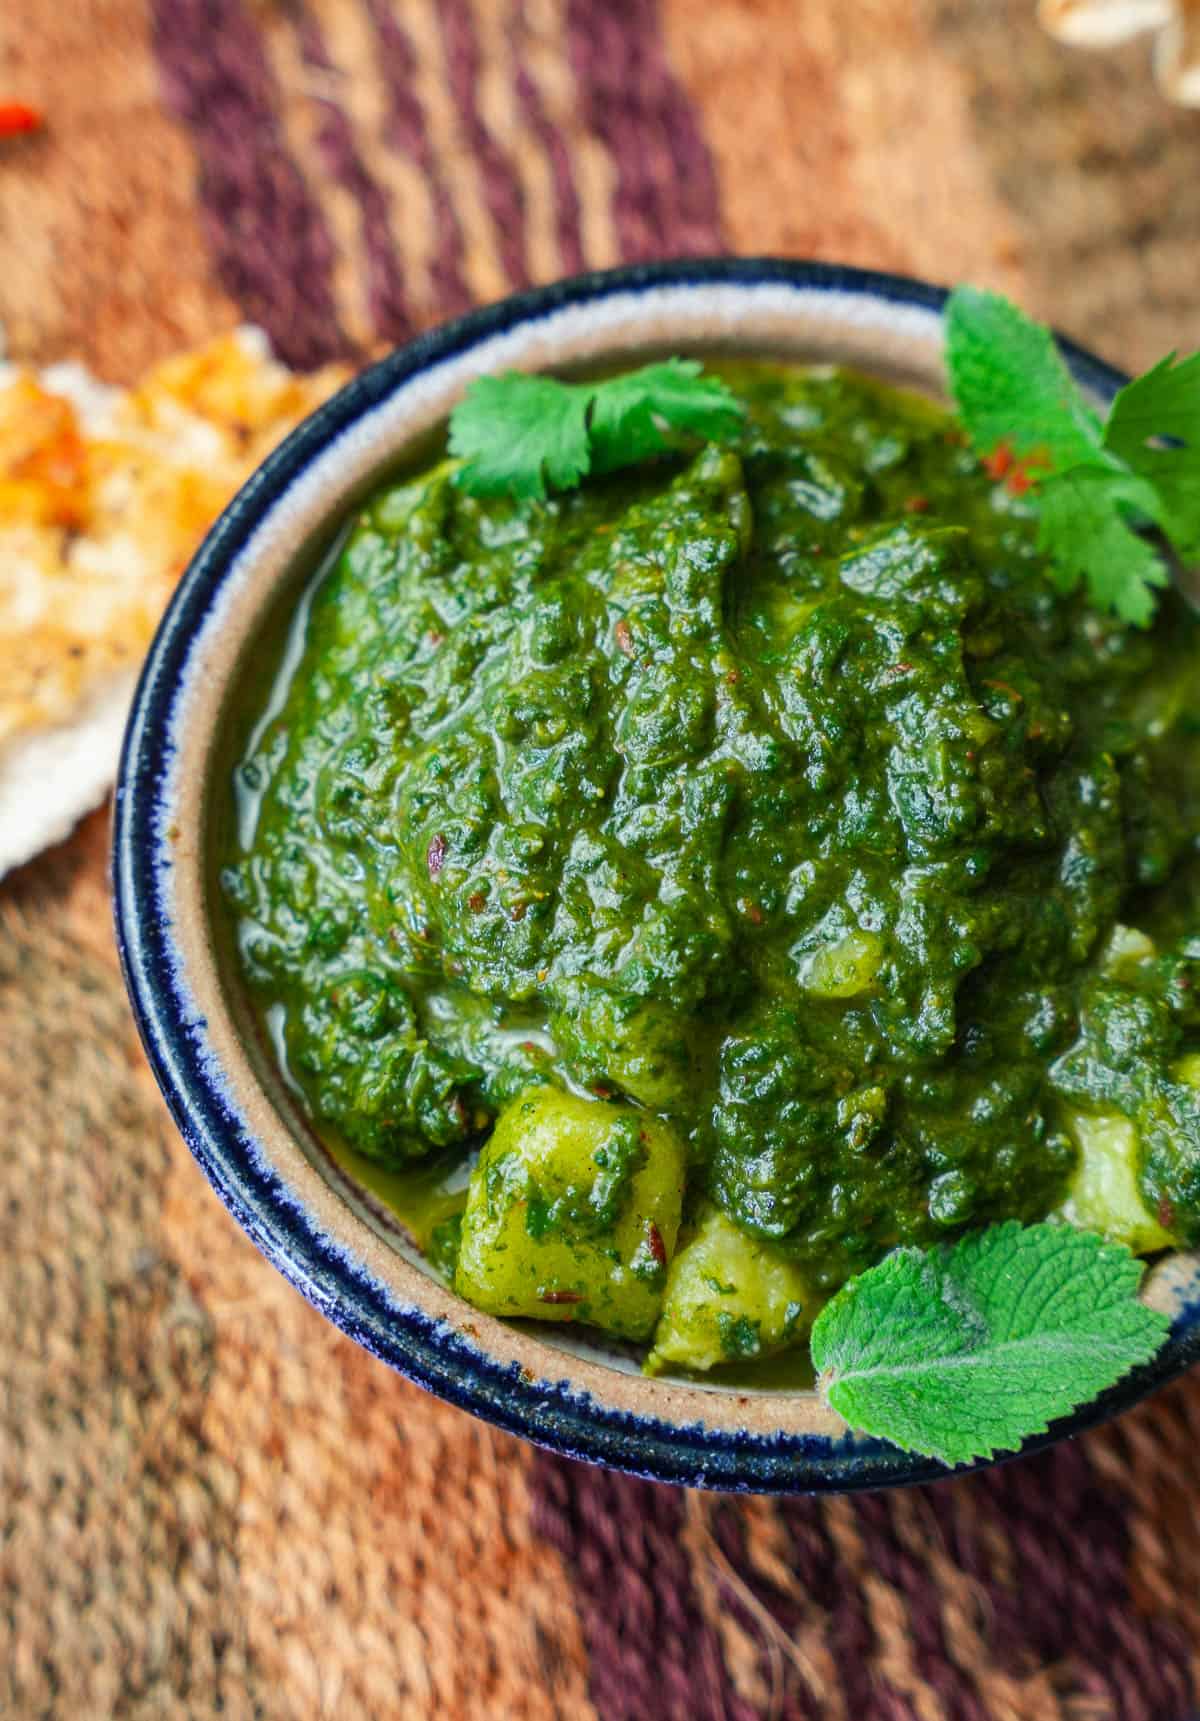 Saag aloo garnished with cilantro and mint leaves in a blue rimmed ceramic bowl on a woven mat with a piece of naan.